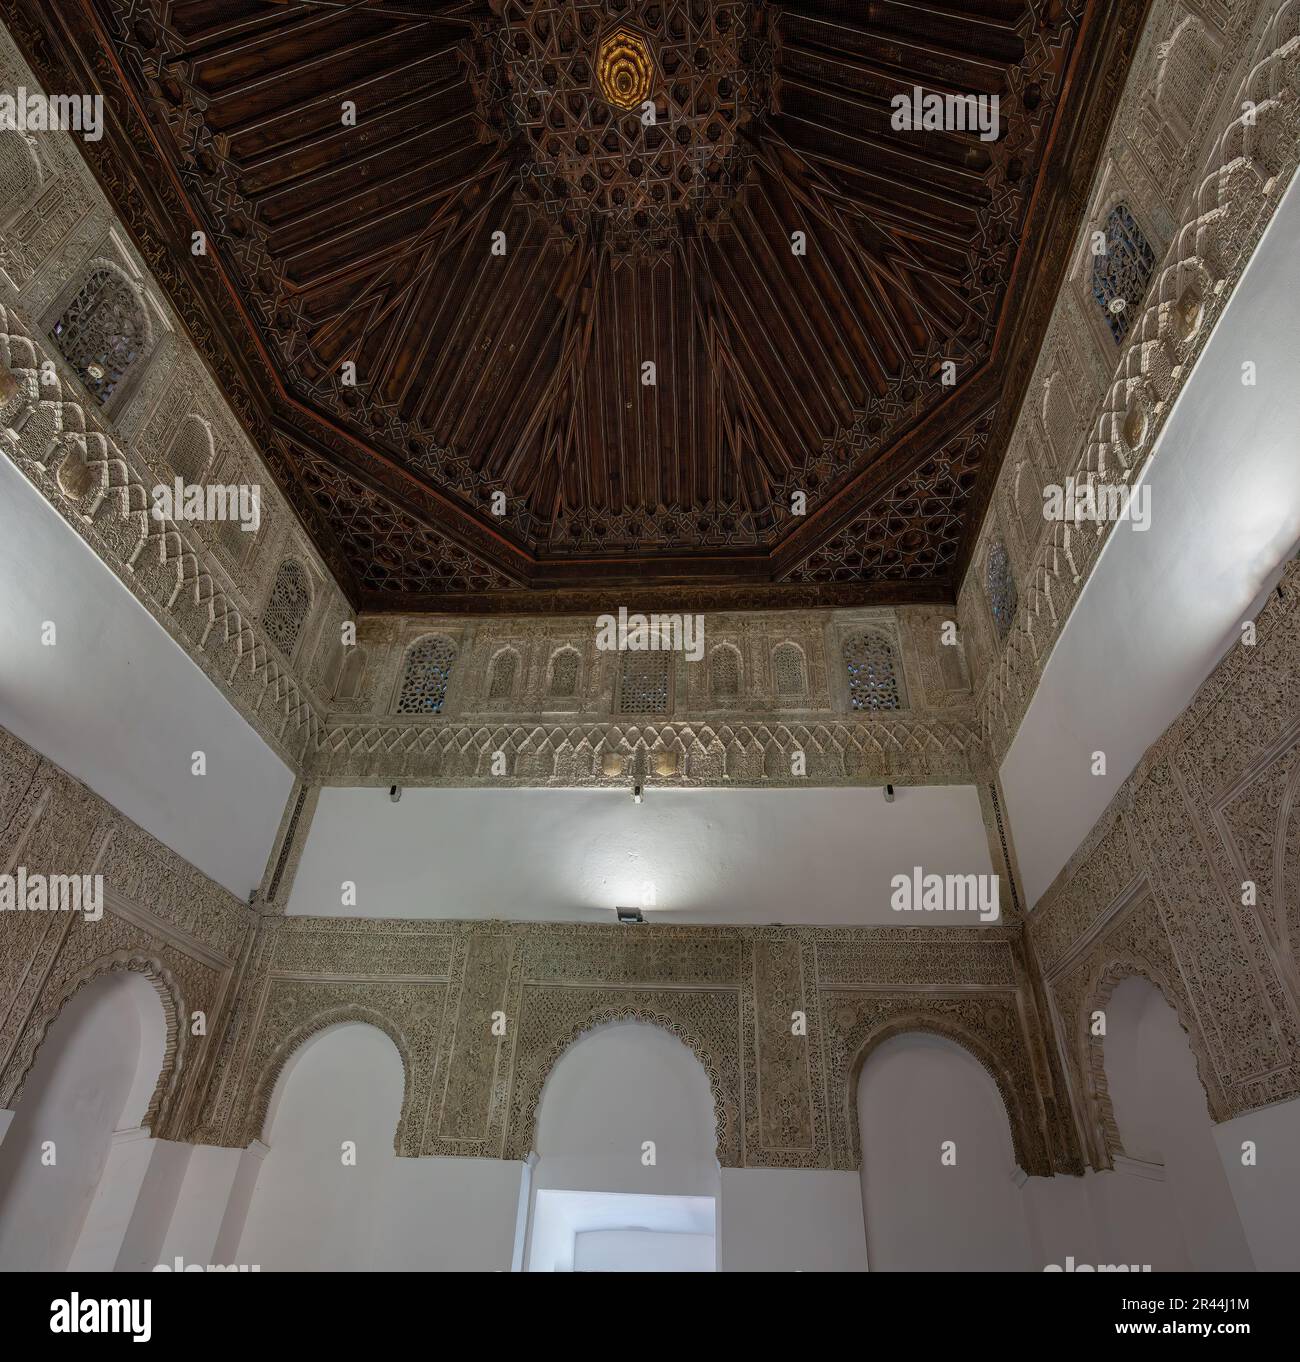 Hall of Justice Ceiling (Sala de la Justicia) at Alcazar (Royal Palace of Seville) - Seville, Andalusia, Spain Stock Photo